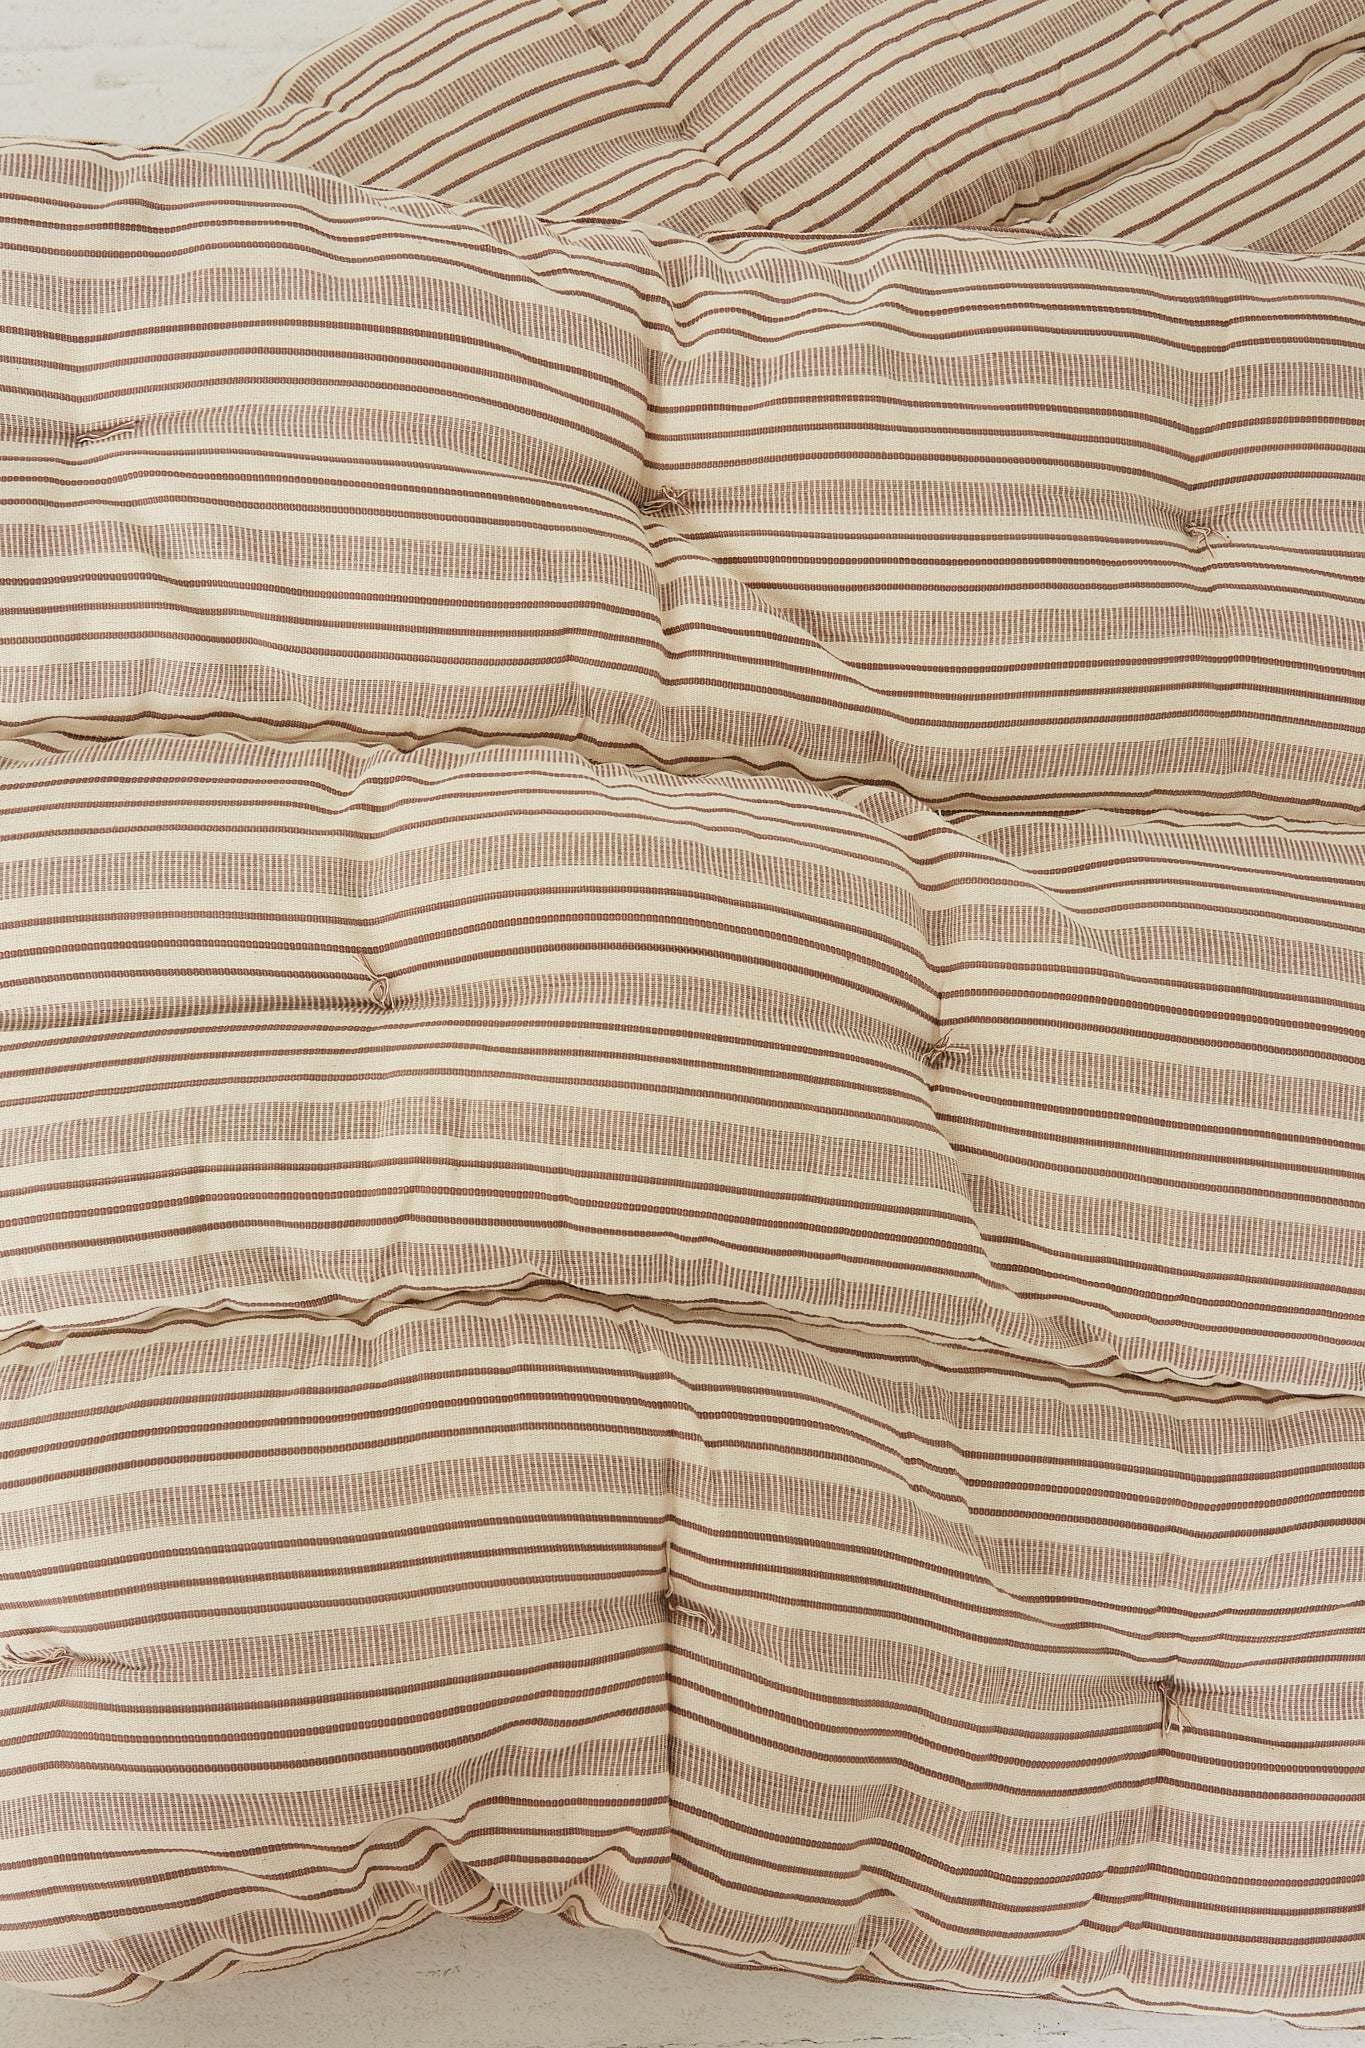 A Tensira Tufted Overlay Mattress in Chocolate Brown and Off White Stripe.